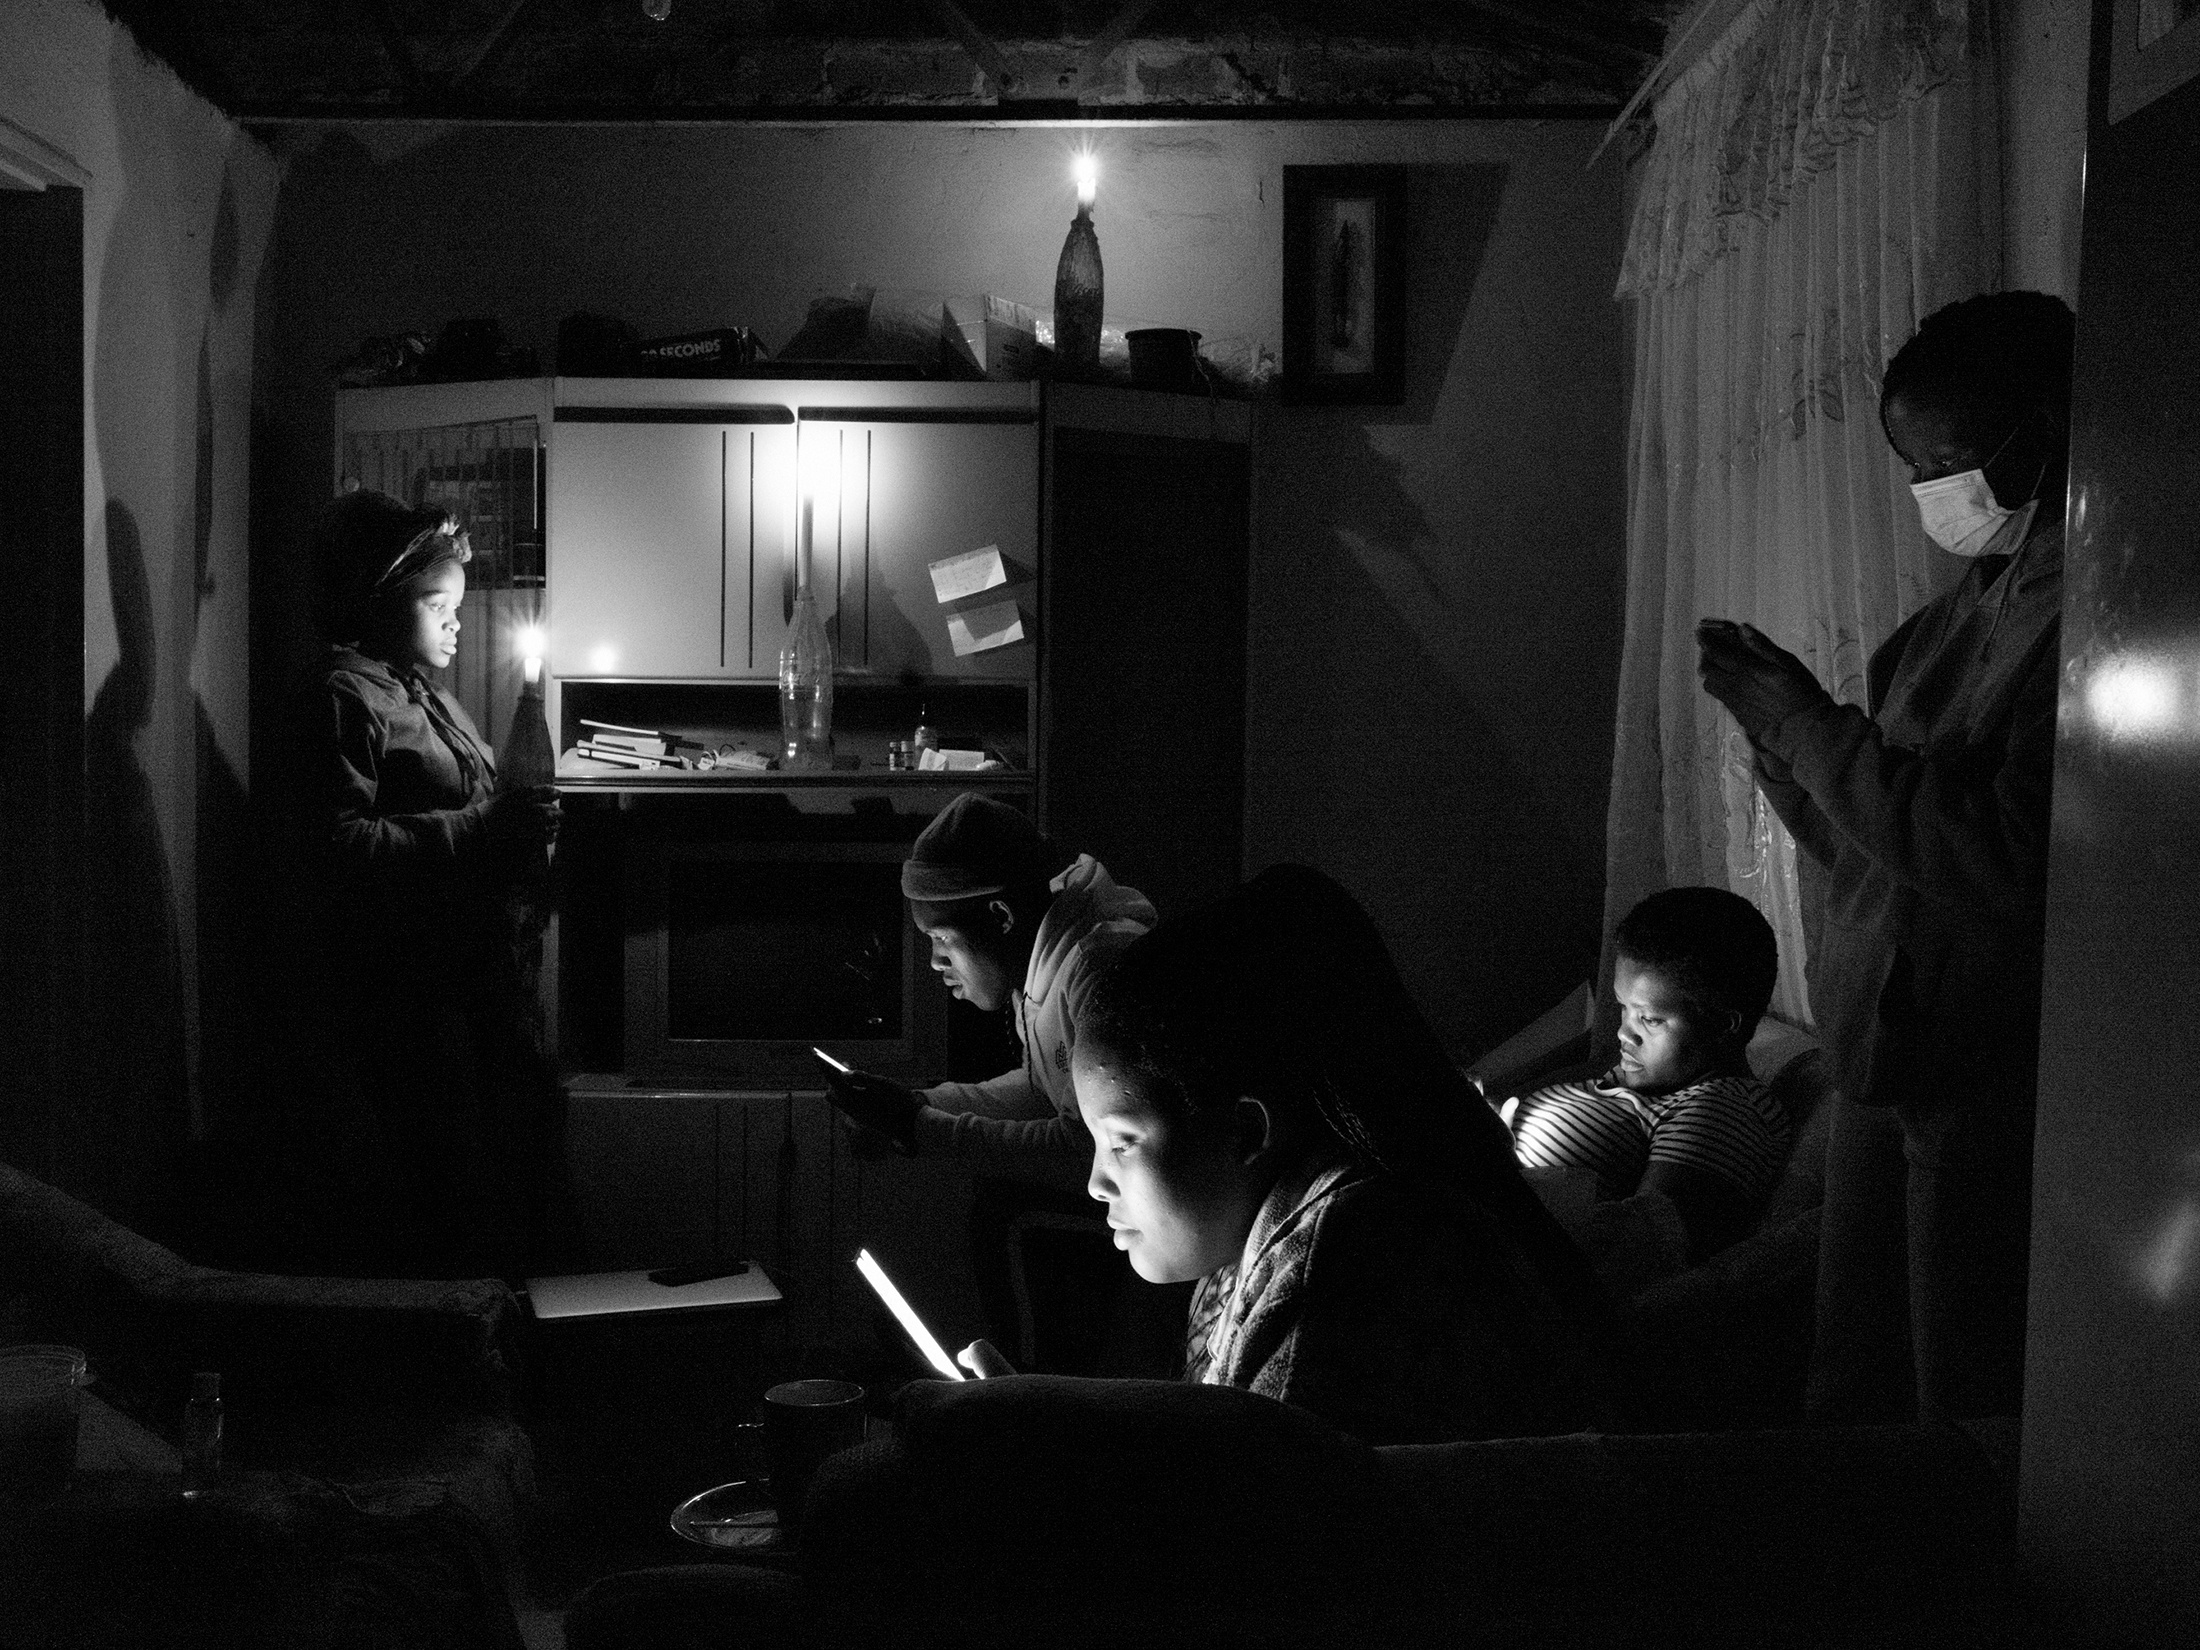 Lindokuhle Sobekwa's photograph 'Death of George Floyd' shows a group of individuals in candle lit room look at their cellphones.
